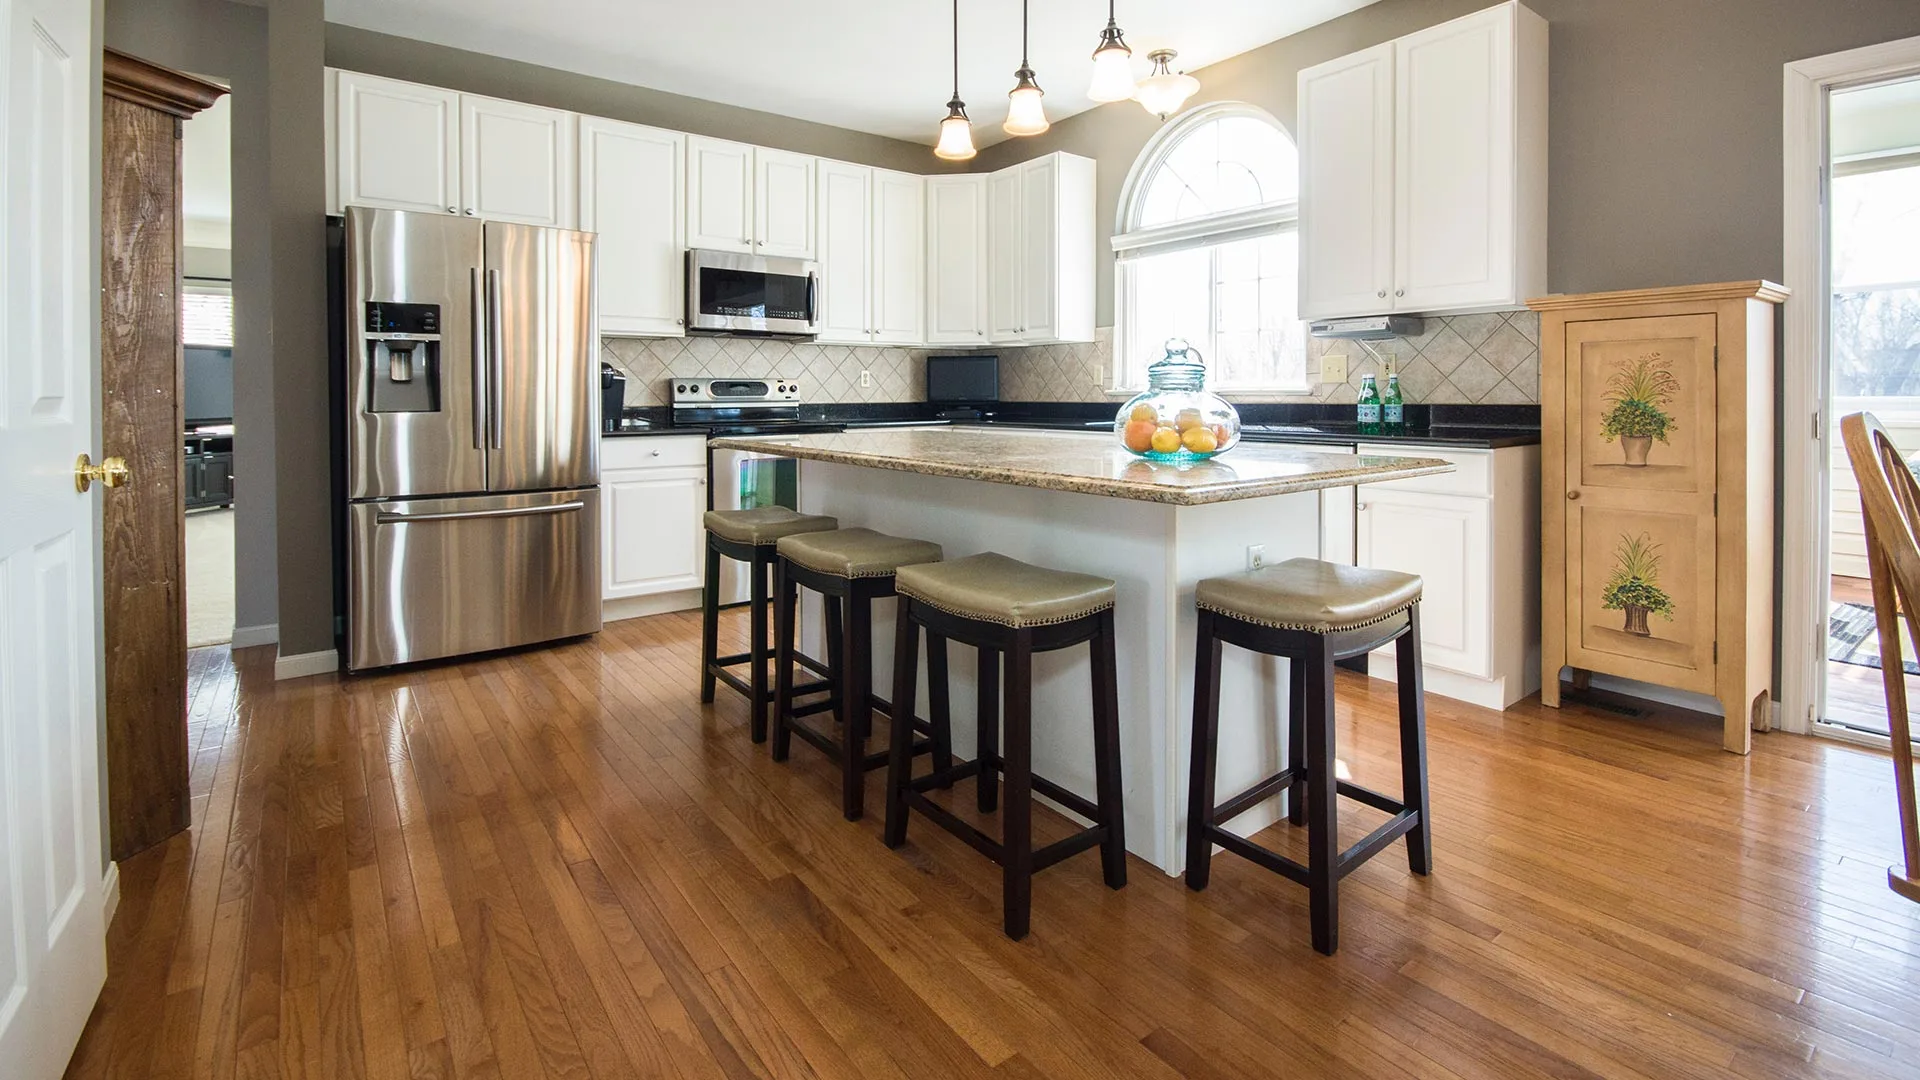 3 Things to Consider Before Remodeling Your Kitchen